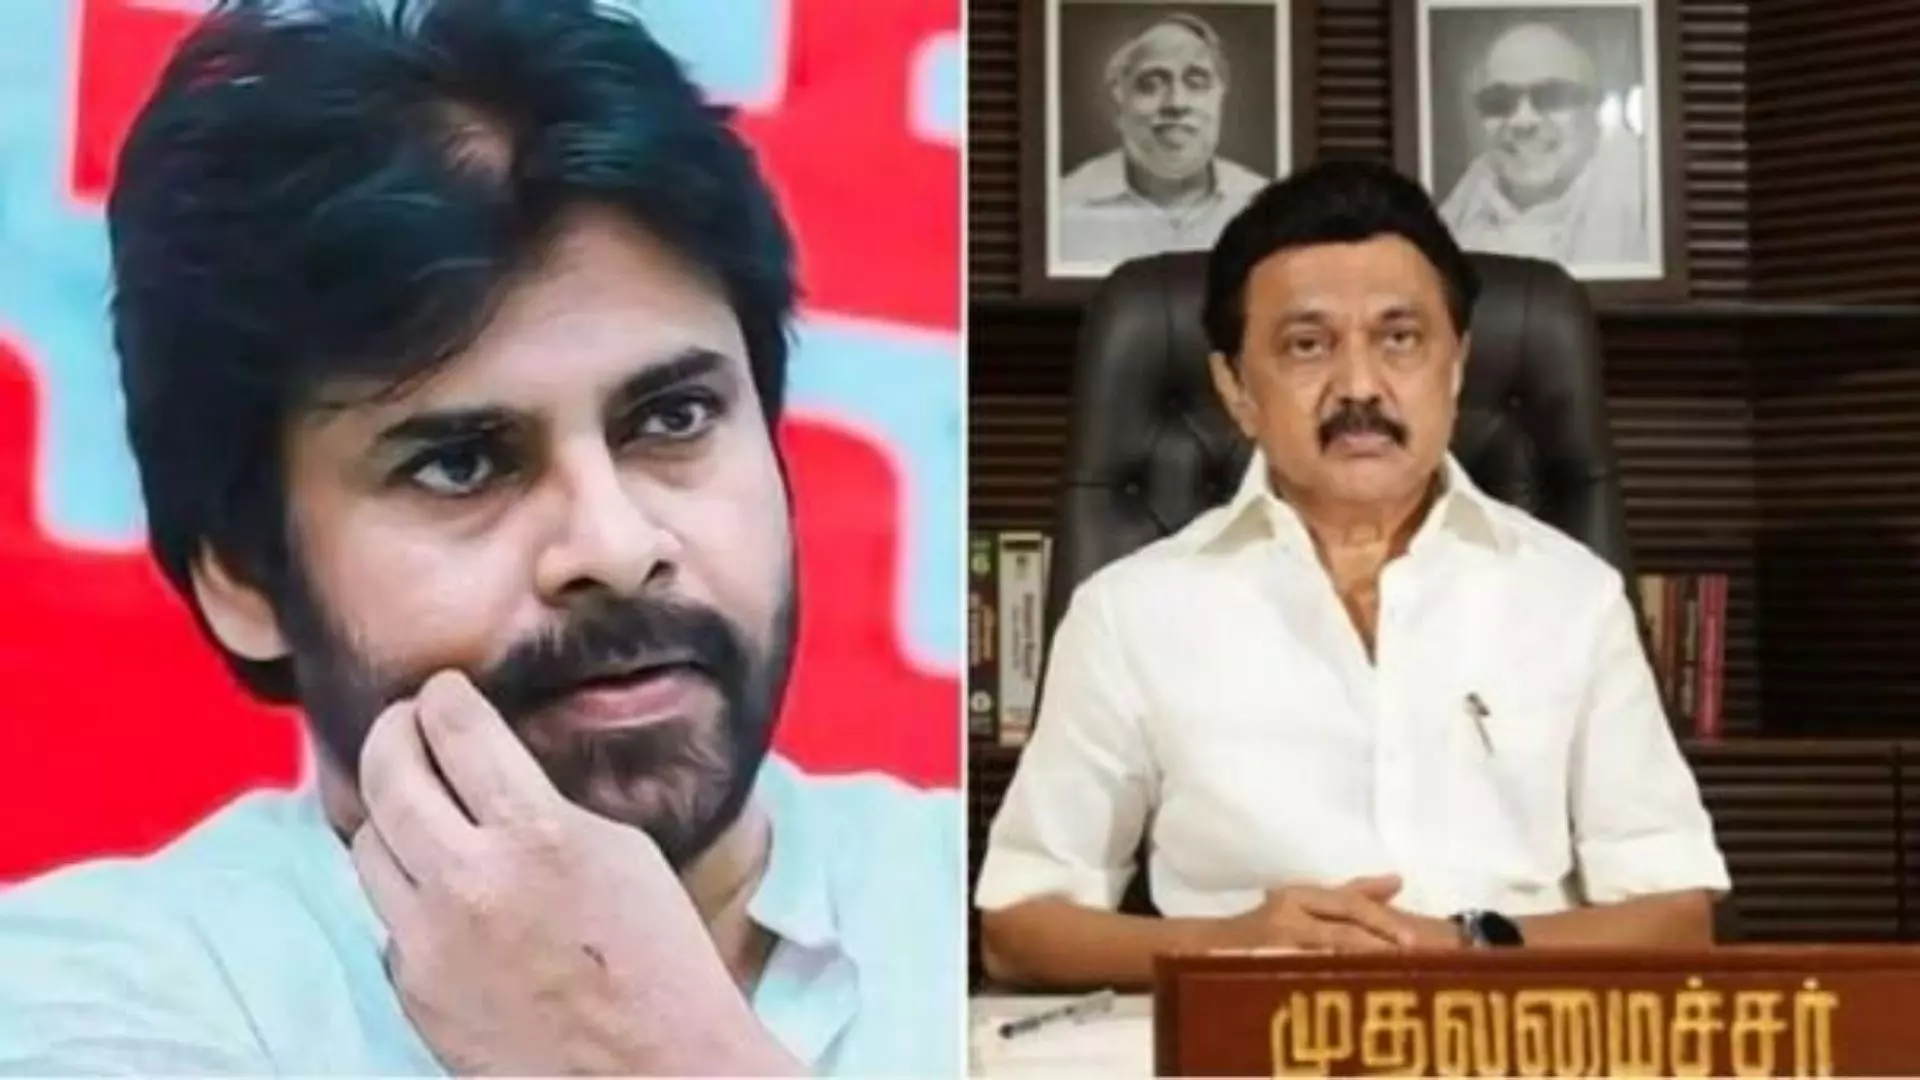 Tamil Nadu Minister Mentioned Pawan Kalyan Name in Assembly About His Tweet on CM Stalin